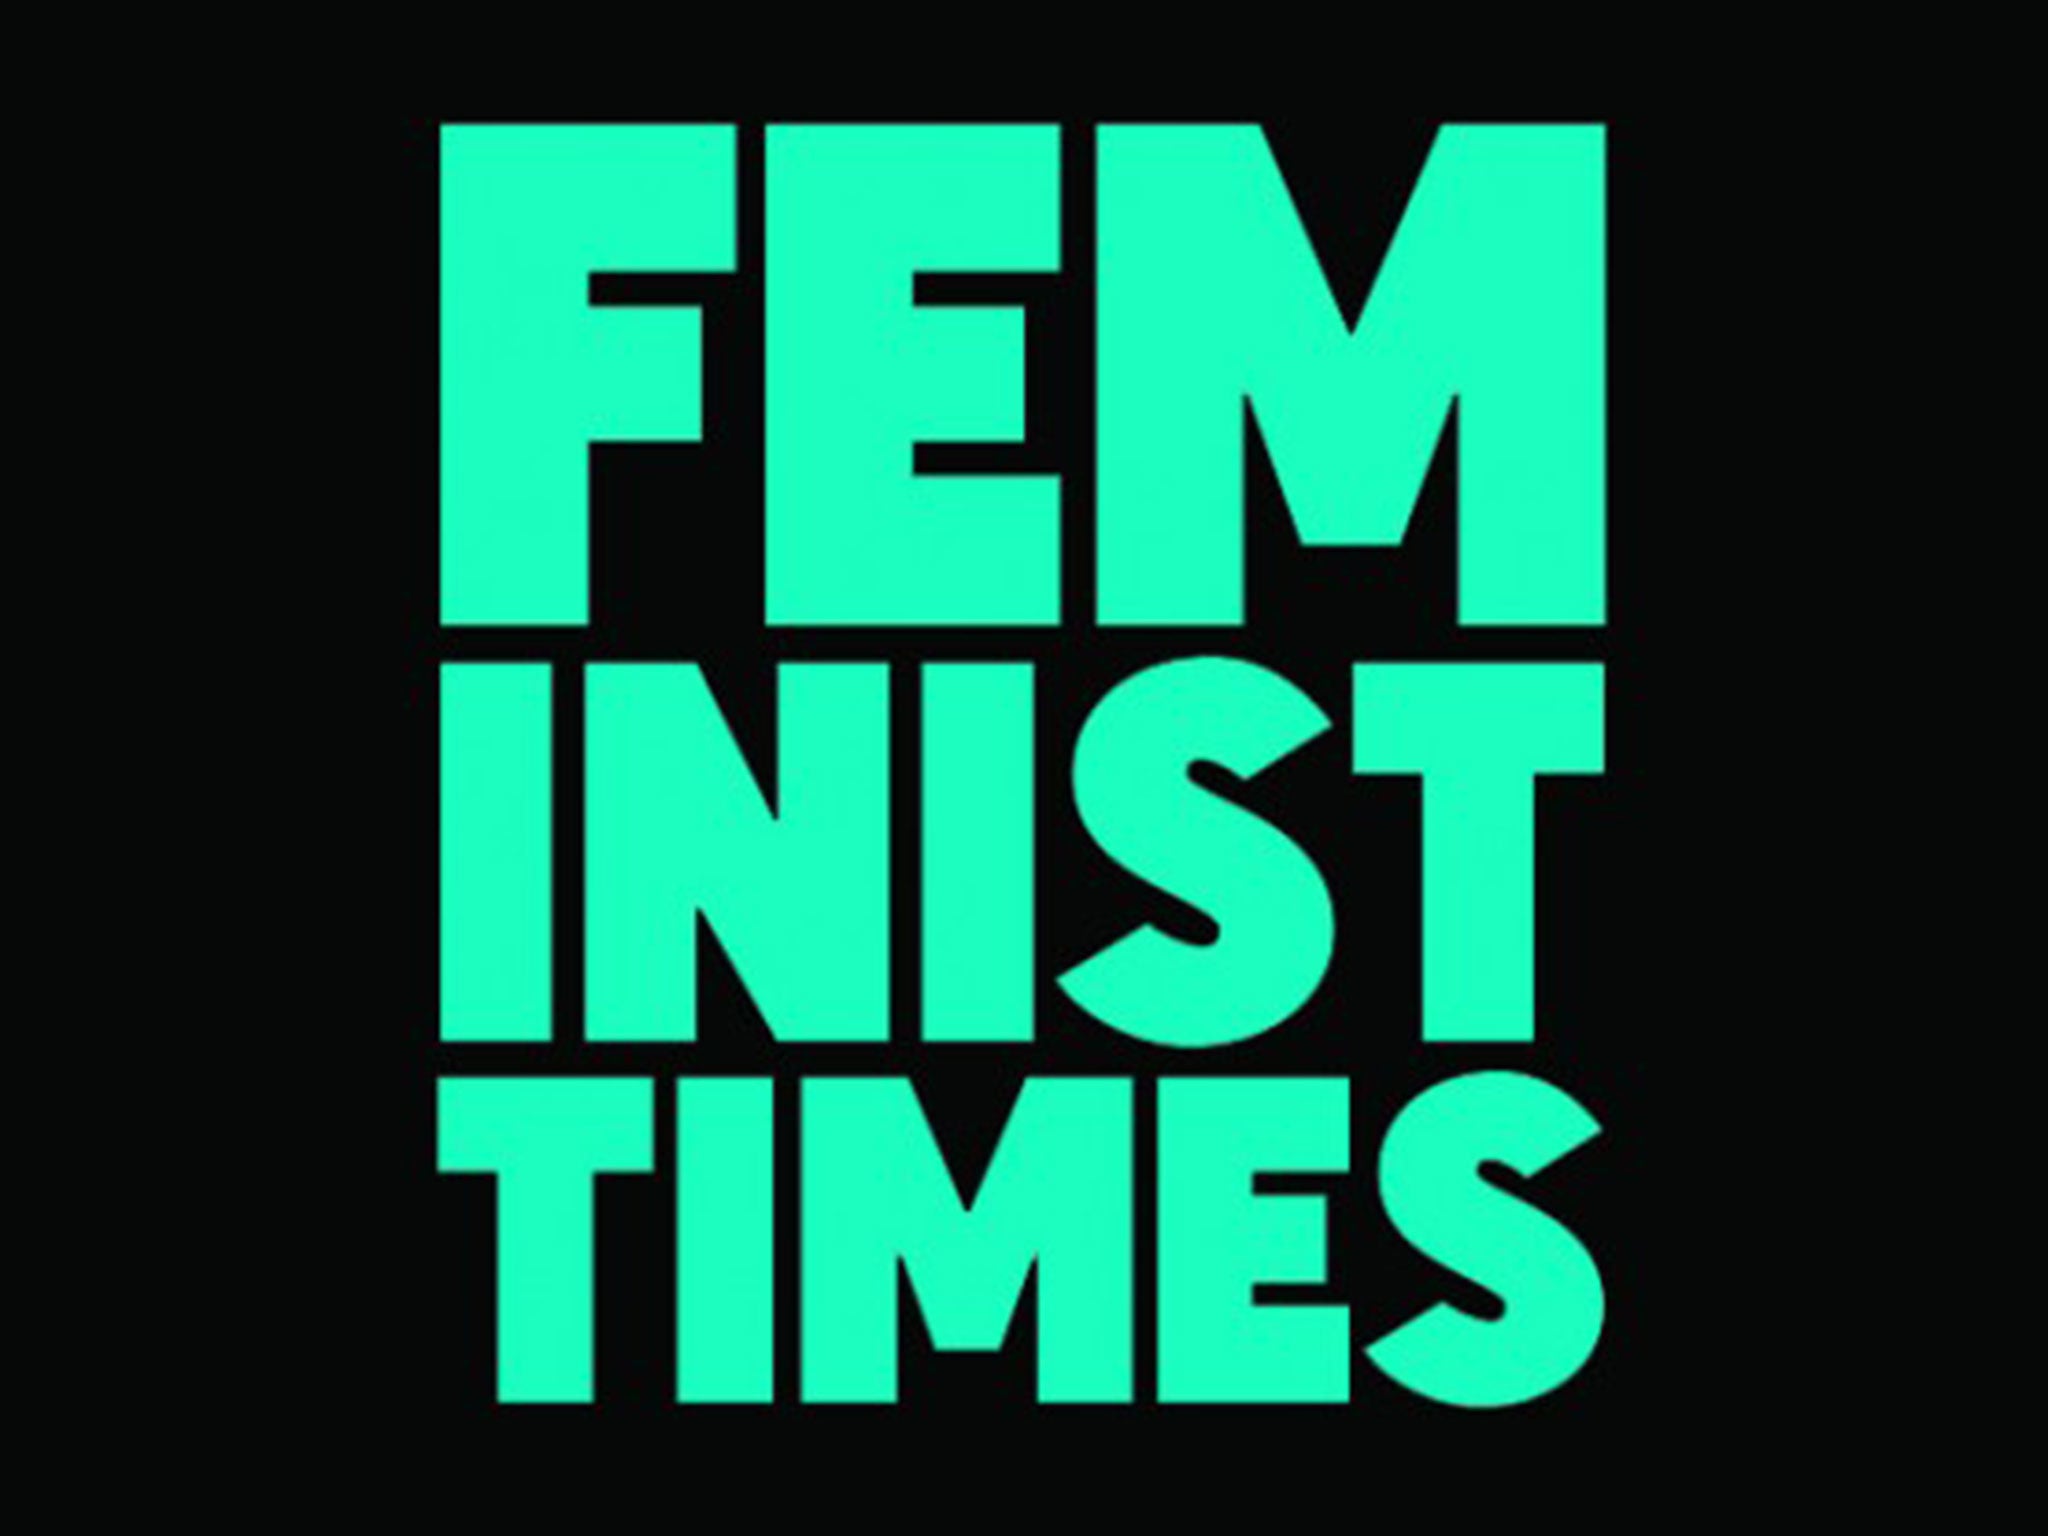 The Feminist Times launched just nine months ago